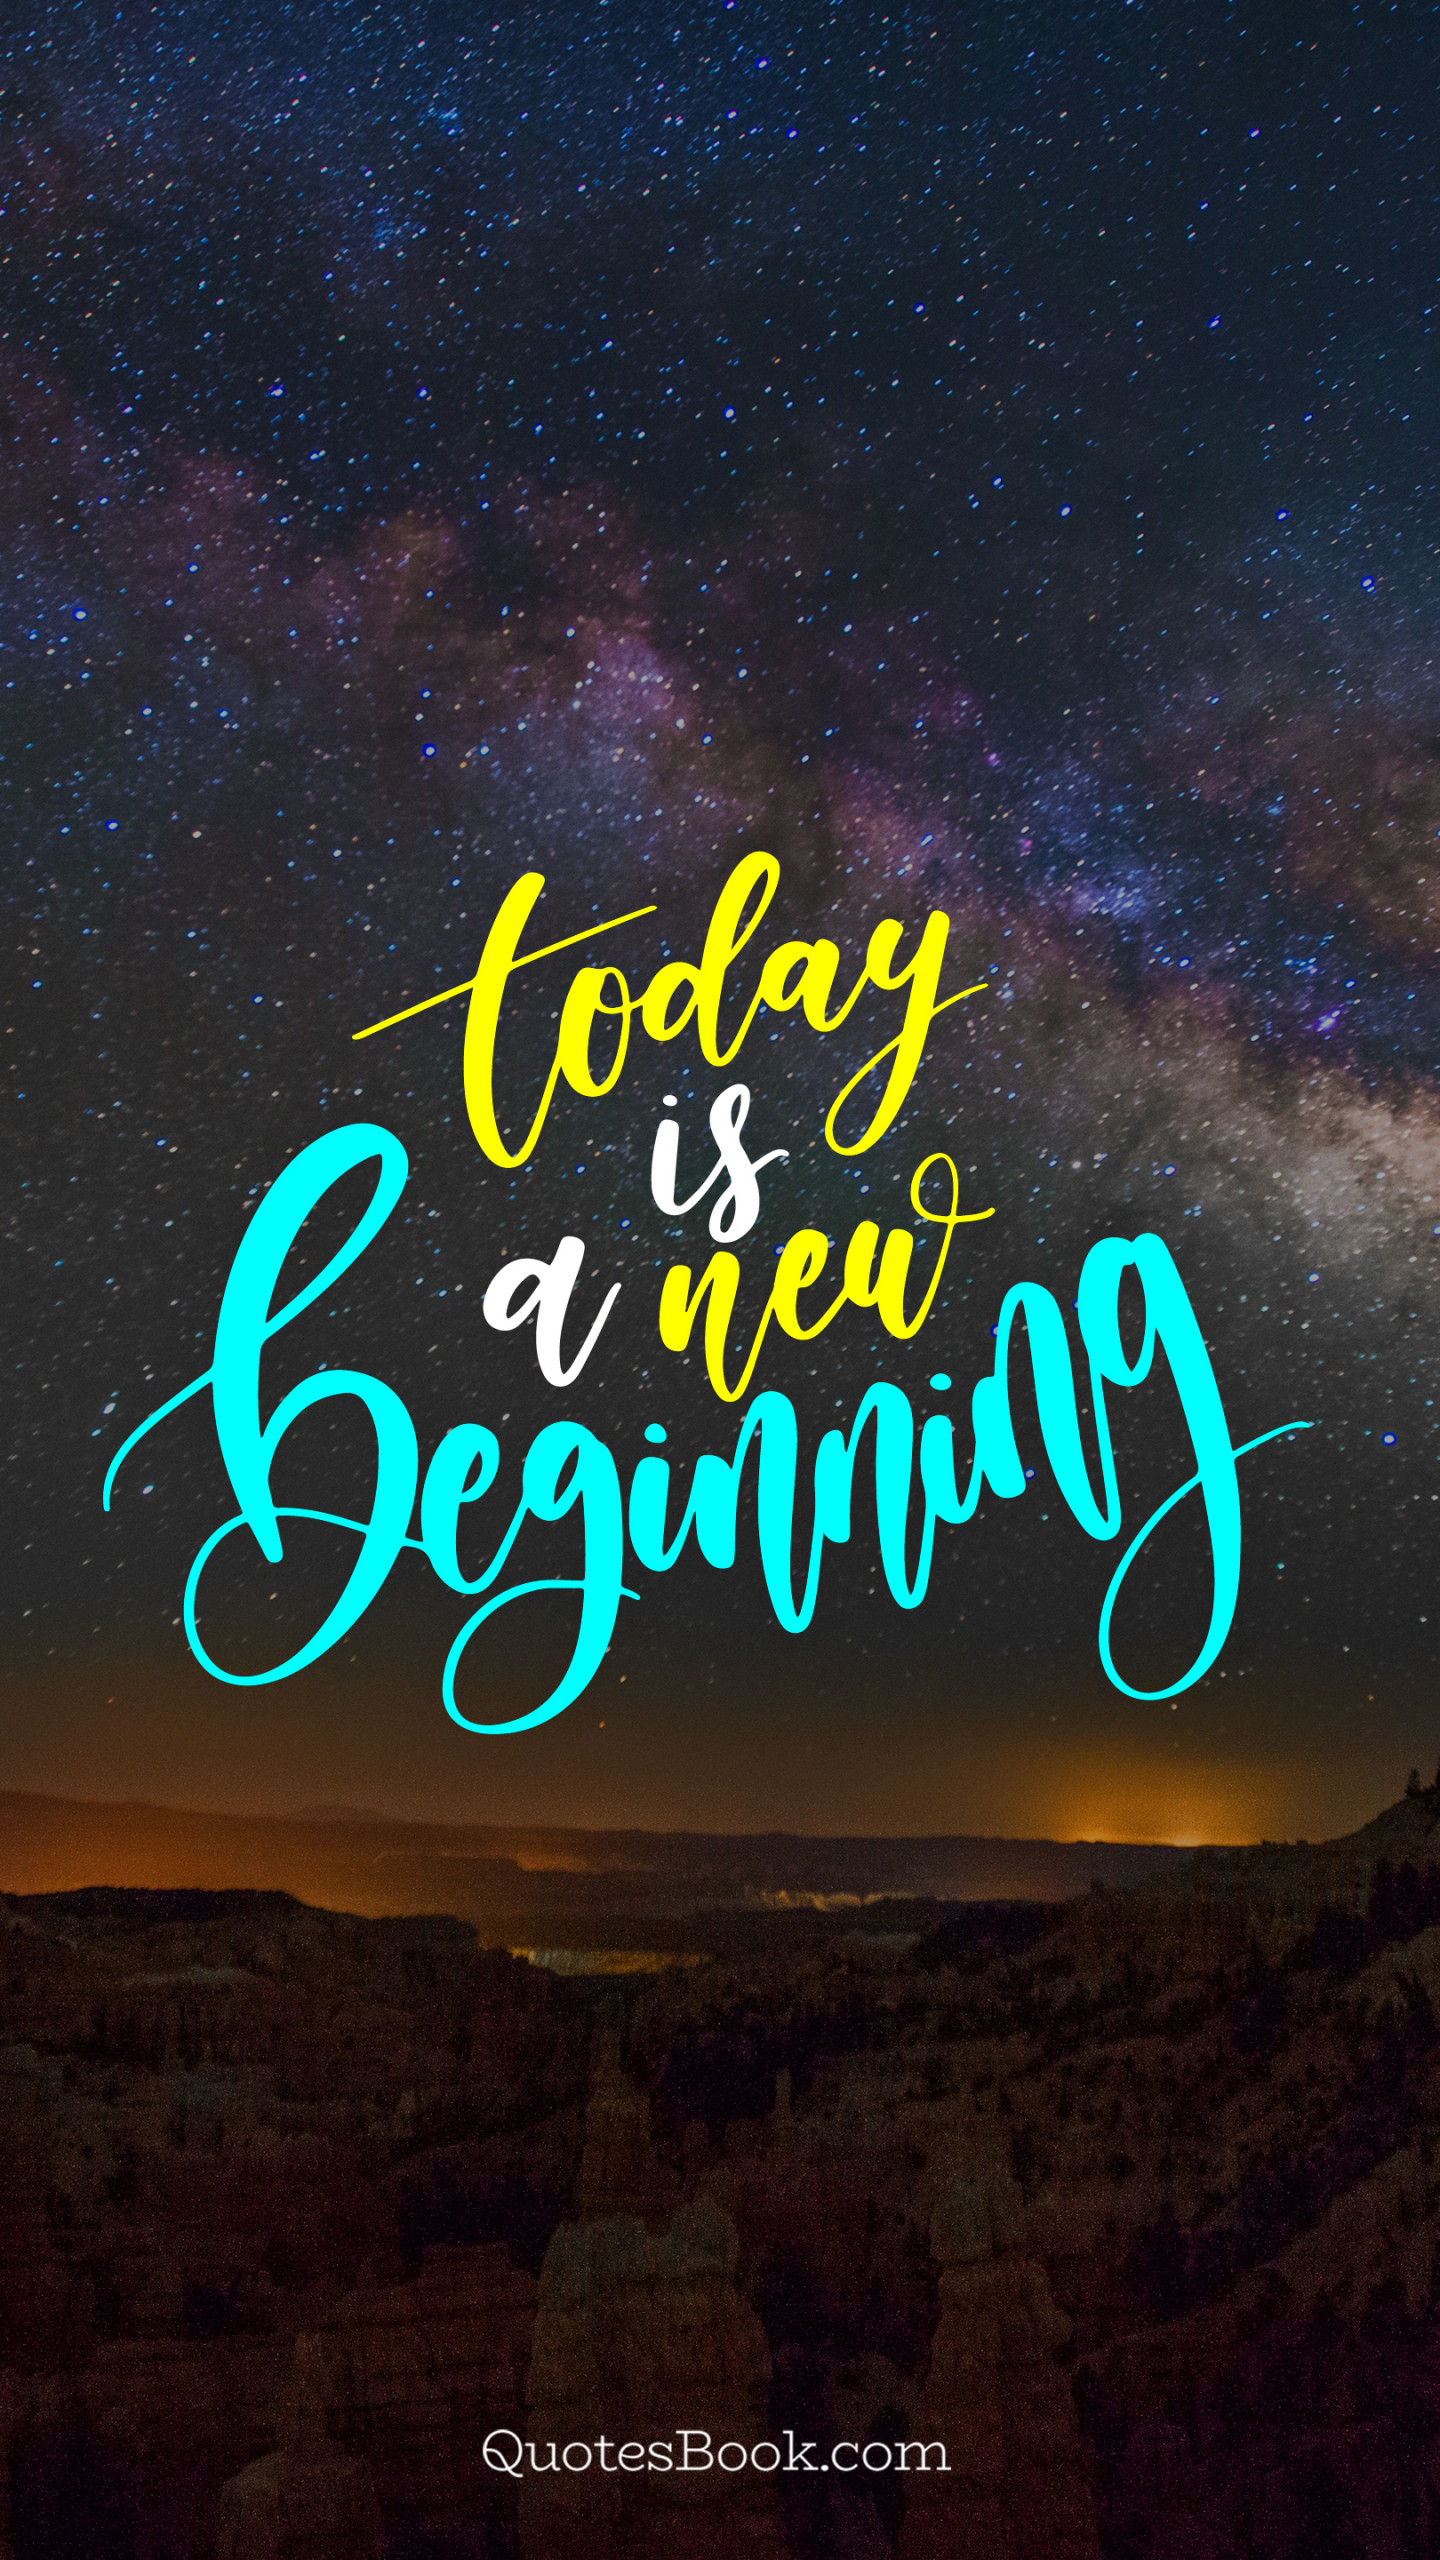 Today is a new beginning - QuotesBook